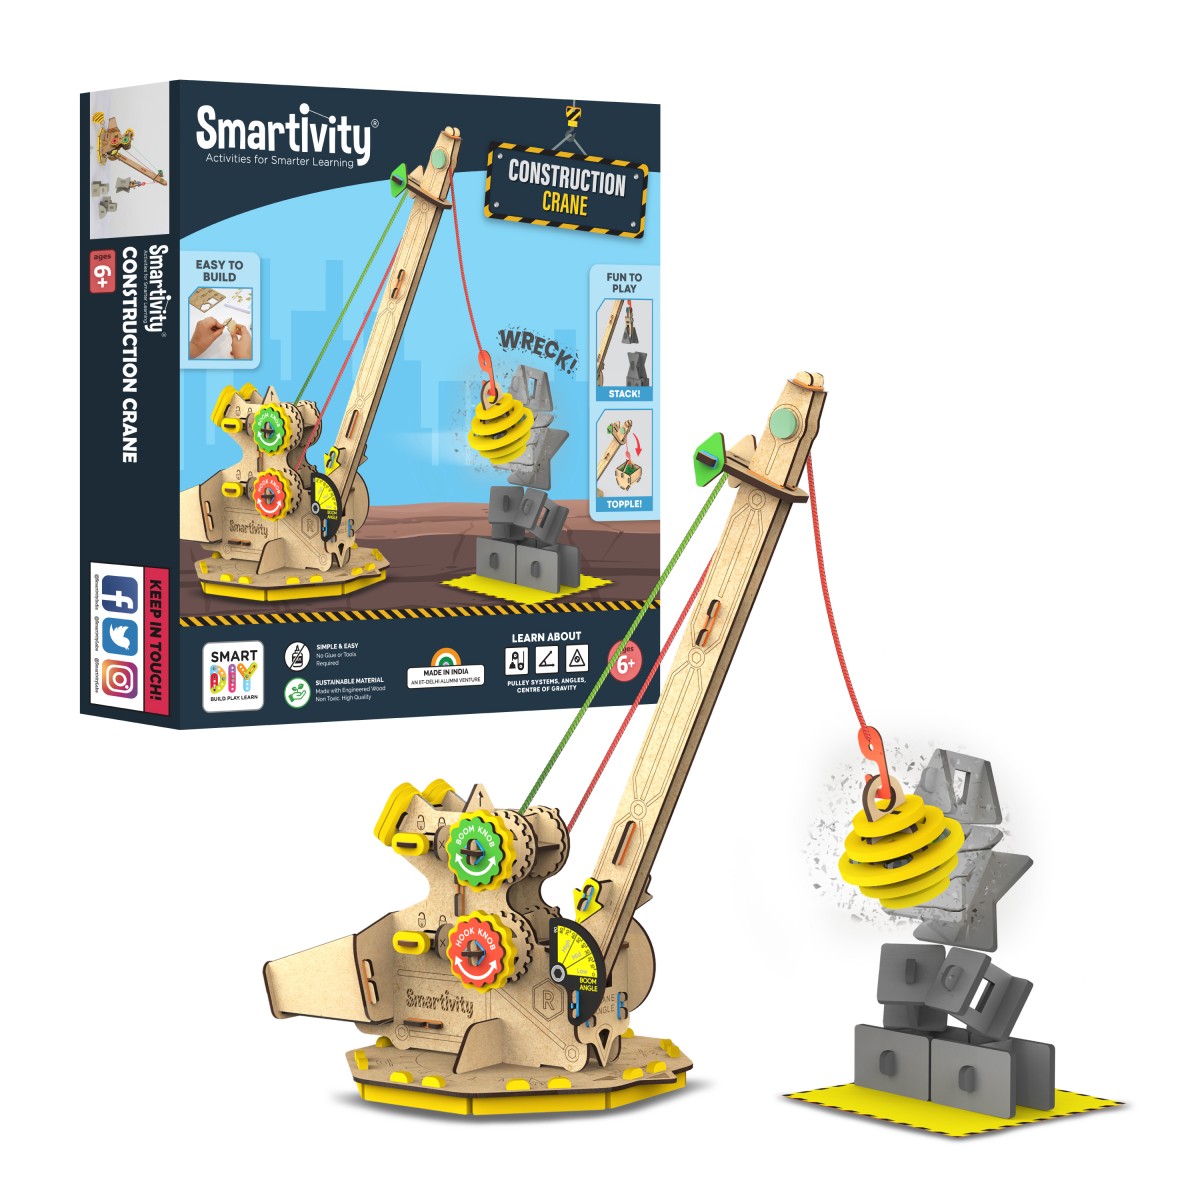 Smartivity Construction Crane with 3 Pulleys, STEM DIY Fun Toy, Educational & Construction based Activity Game Kit for Kids 6 to 14, Best Gift for